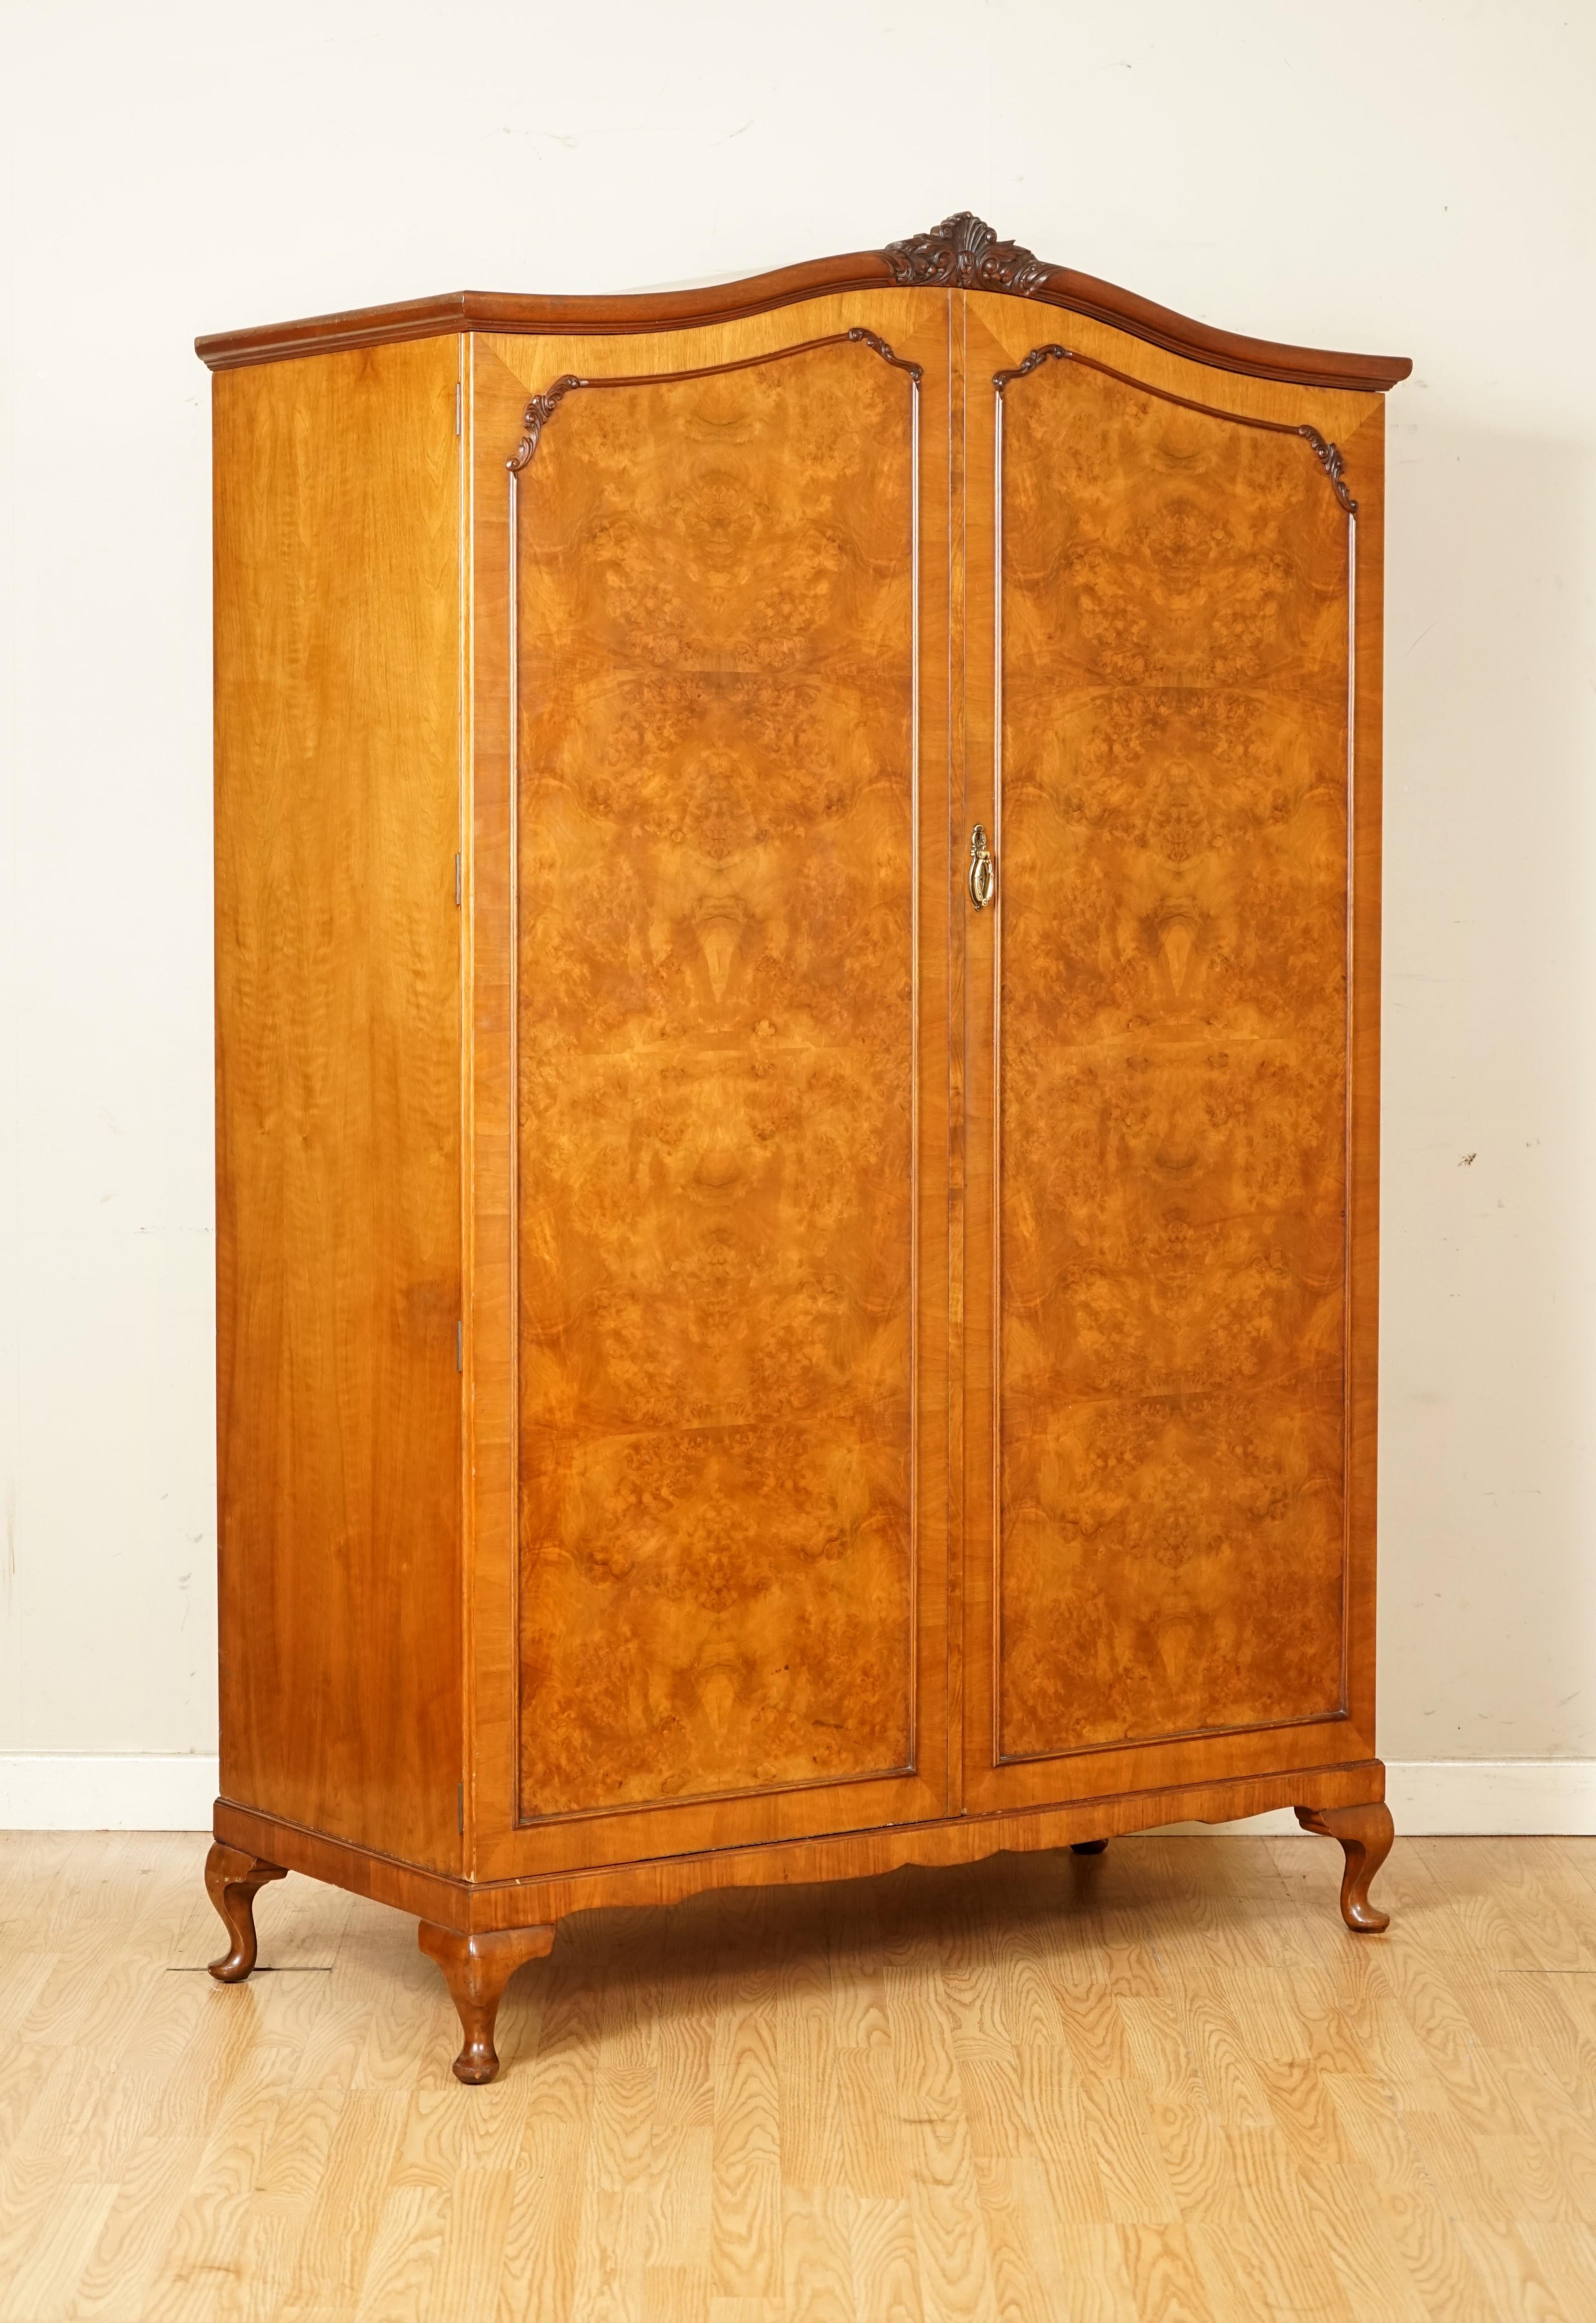 We are so excited to present to you this Beautiful Alfred Cox London Burr Walnut Double Wardrobe.

Here we have a good quality Antique English carved burr walnut wardrobe. Circa 1930's made by the British iconic designer and cabinetmaker, Alfred